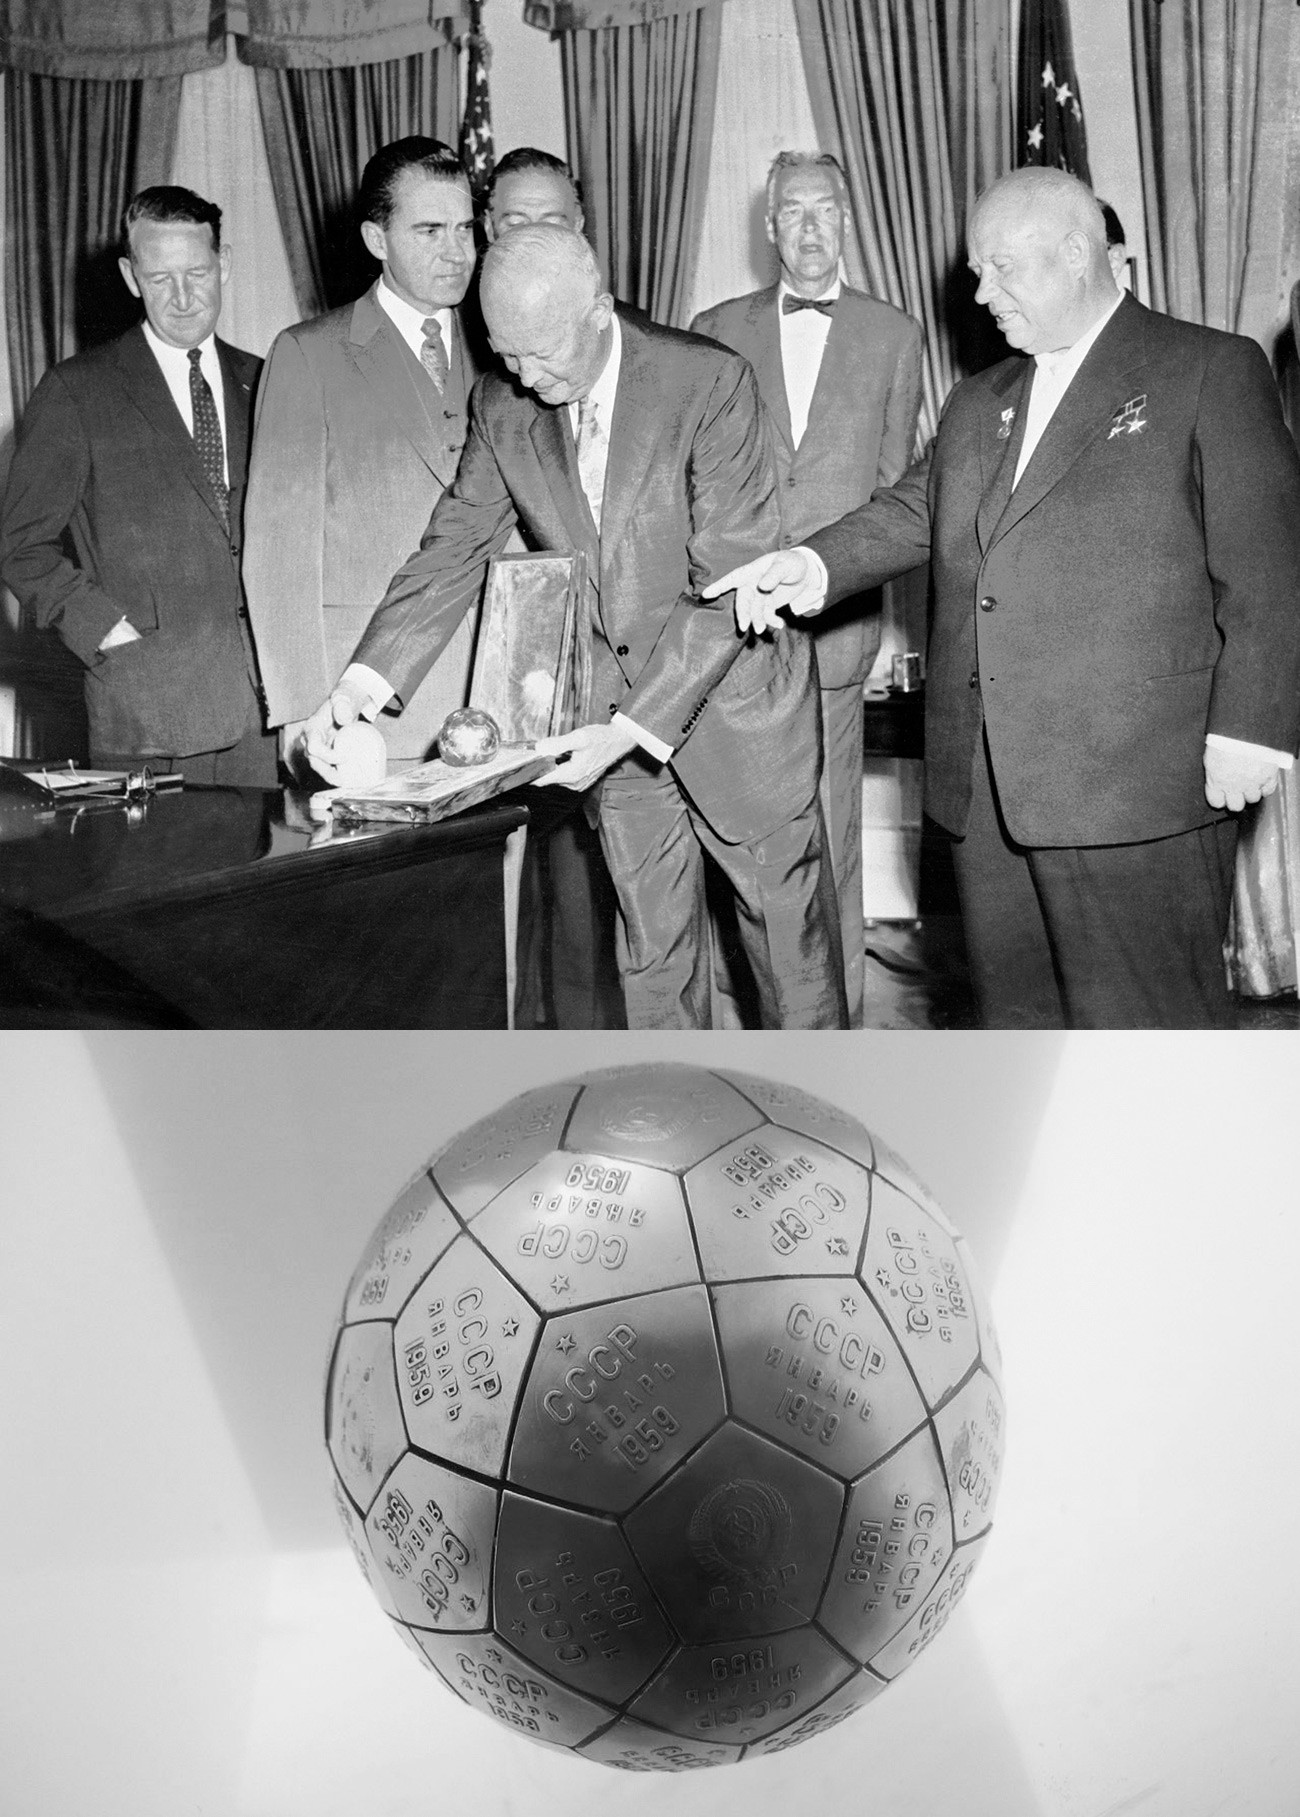 Eisenhower (L) looks to the gift, a miniature of Luna-2 station, that he was given by Soviet Premier Nikita Khrushchev (R), during Khrushchev's official visit to the U.S.